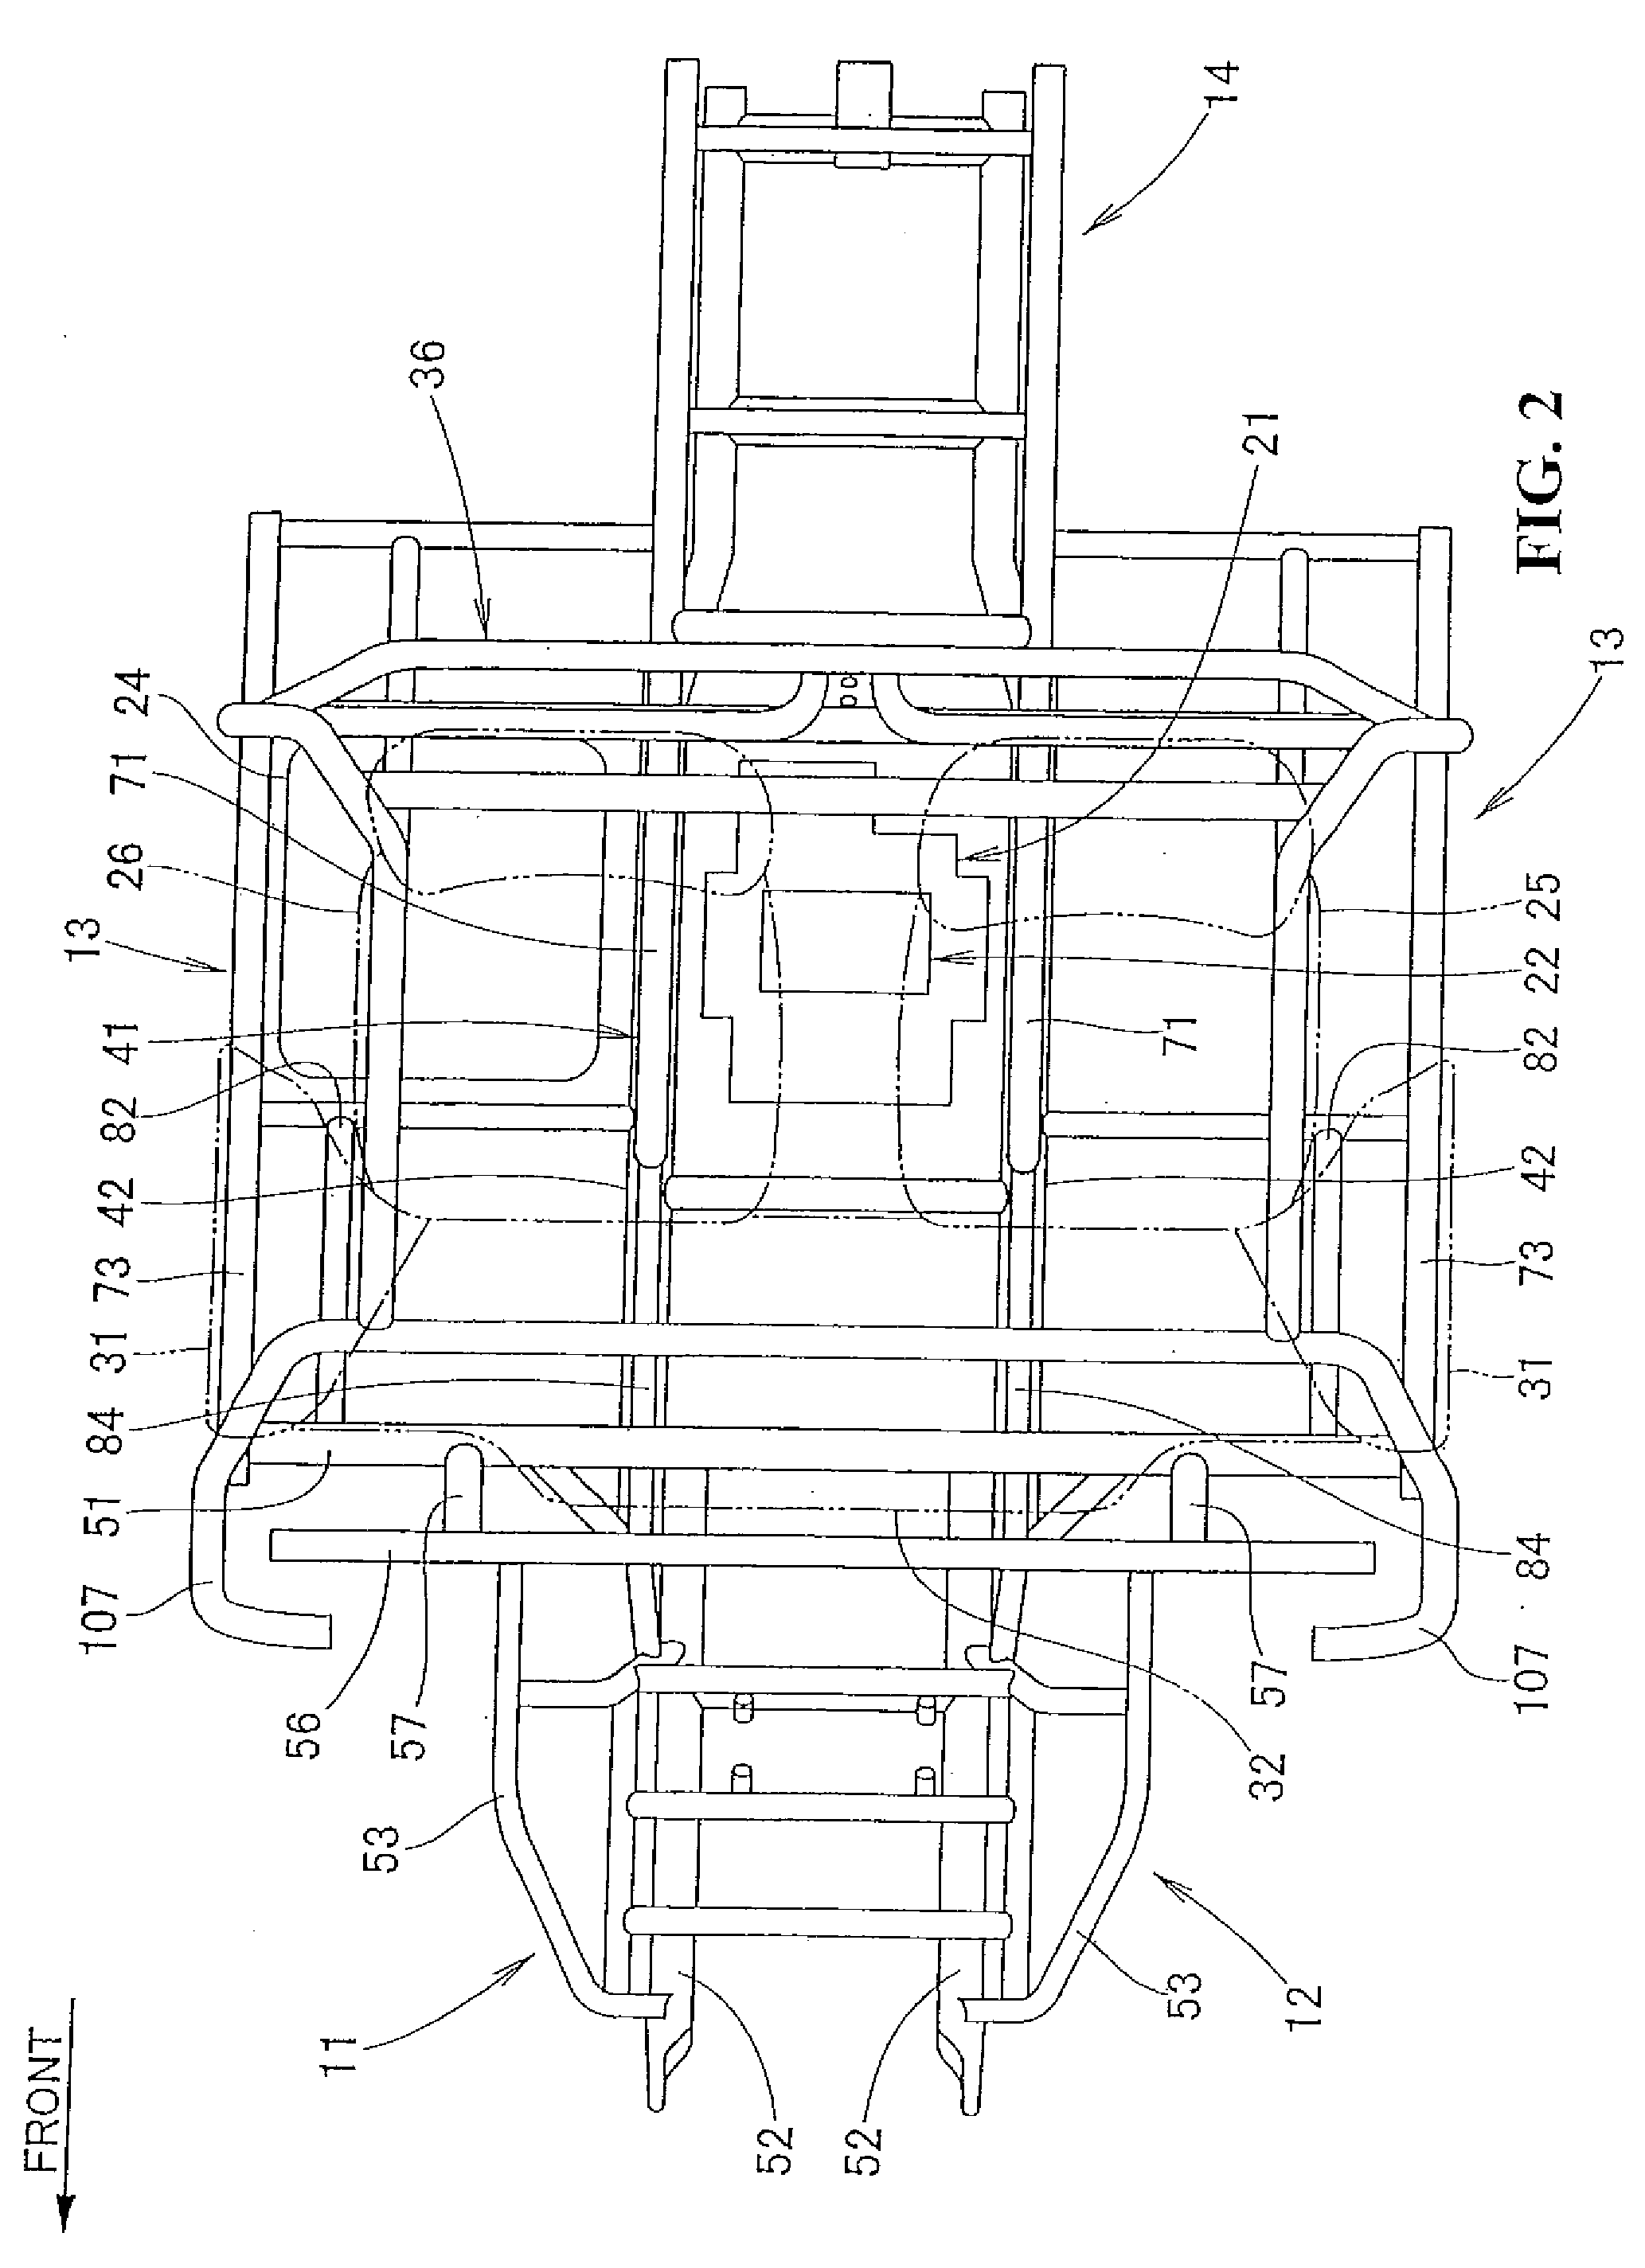 Vehicle frame structure